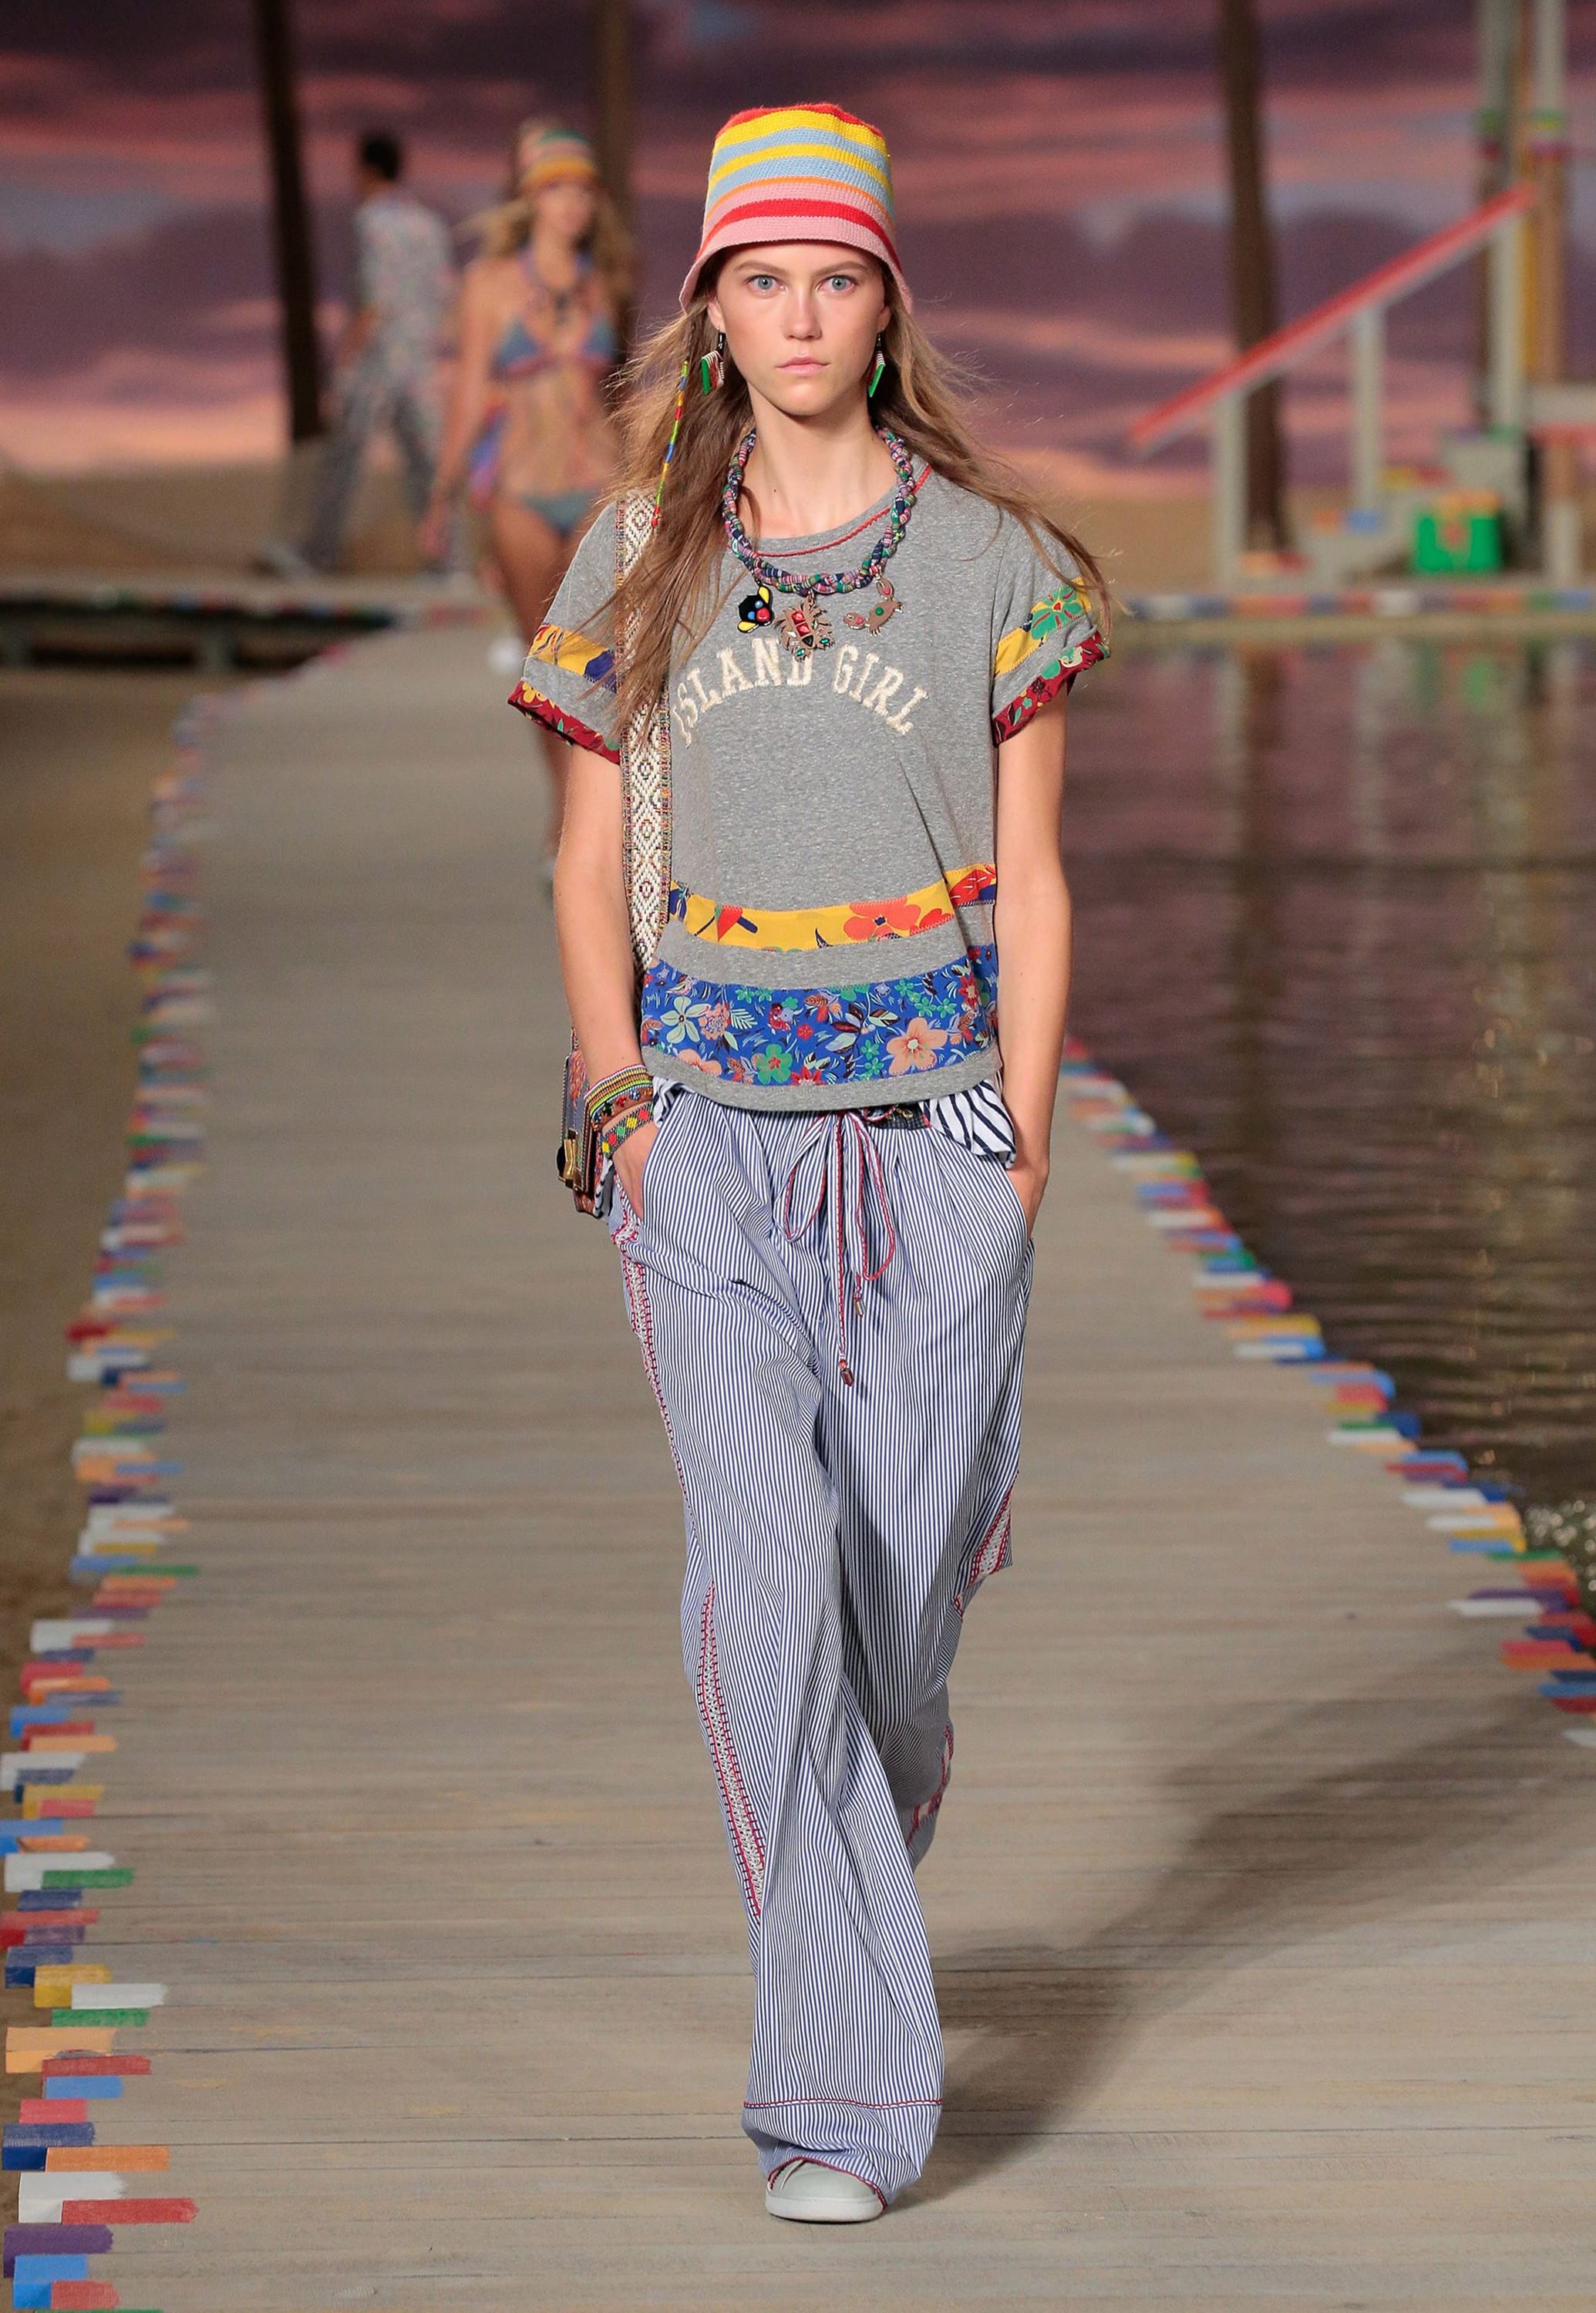 A model walks the catwalk in colorful island life-inspired styles for spring 2016 by Tommy Hilfiger at his runway show at New York Fashion Week.